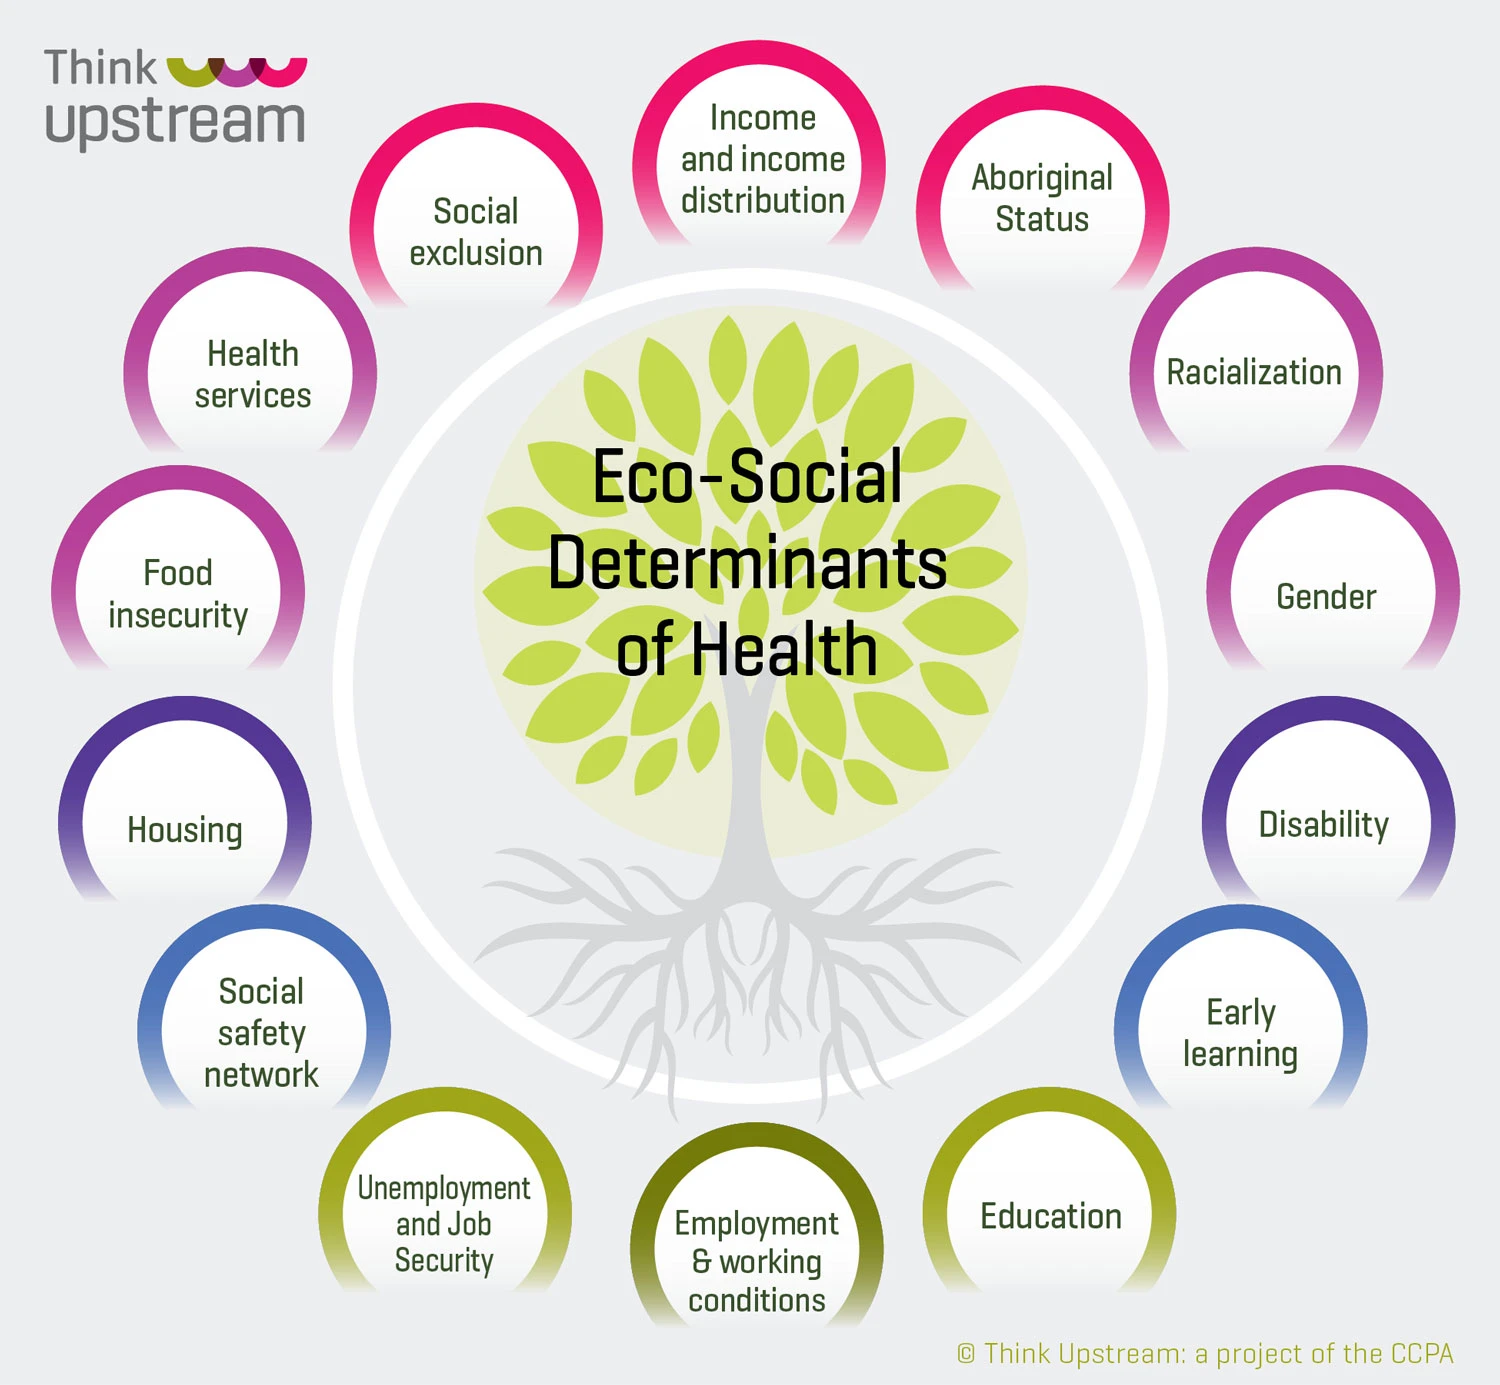 Think Upstream graphic showing the various eco-social determinants of health.